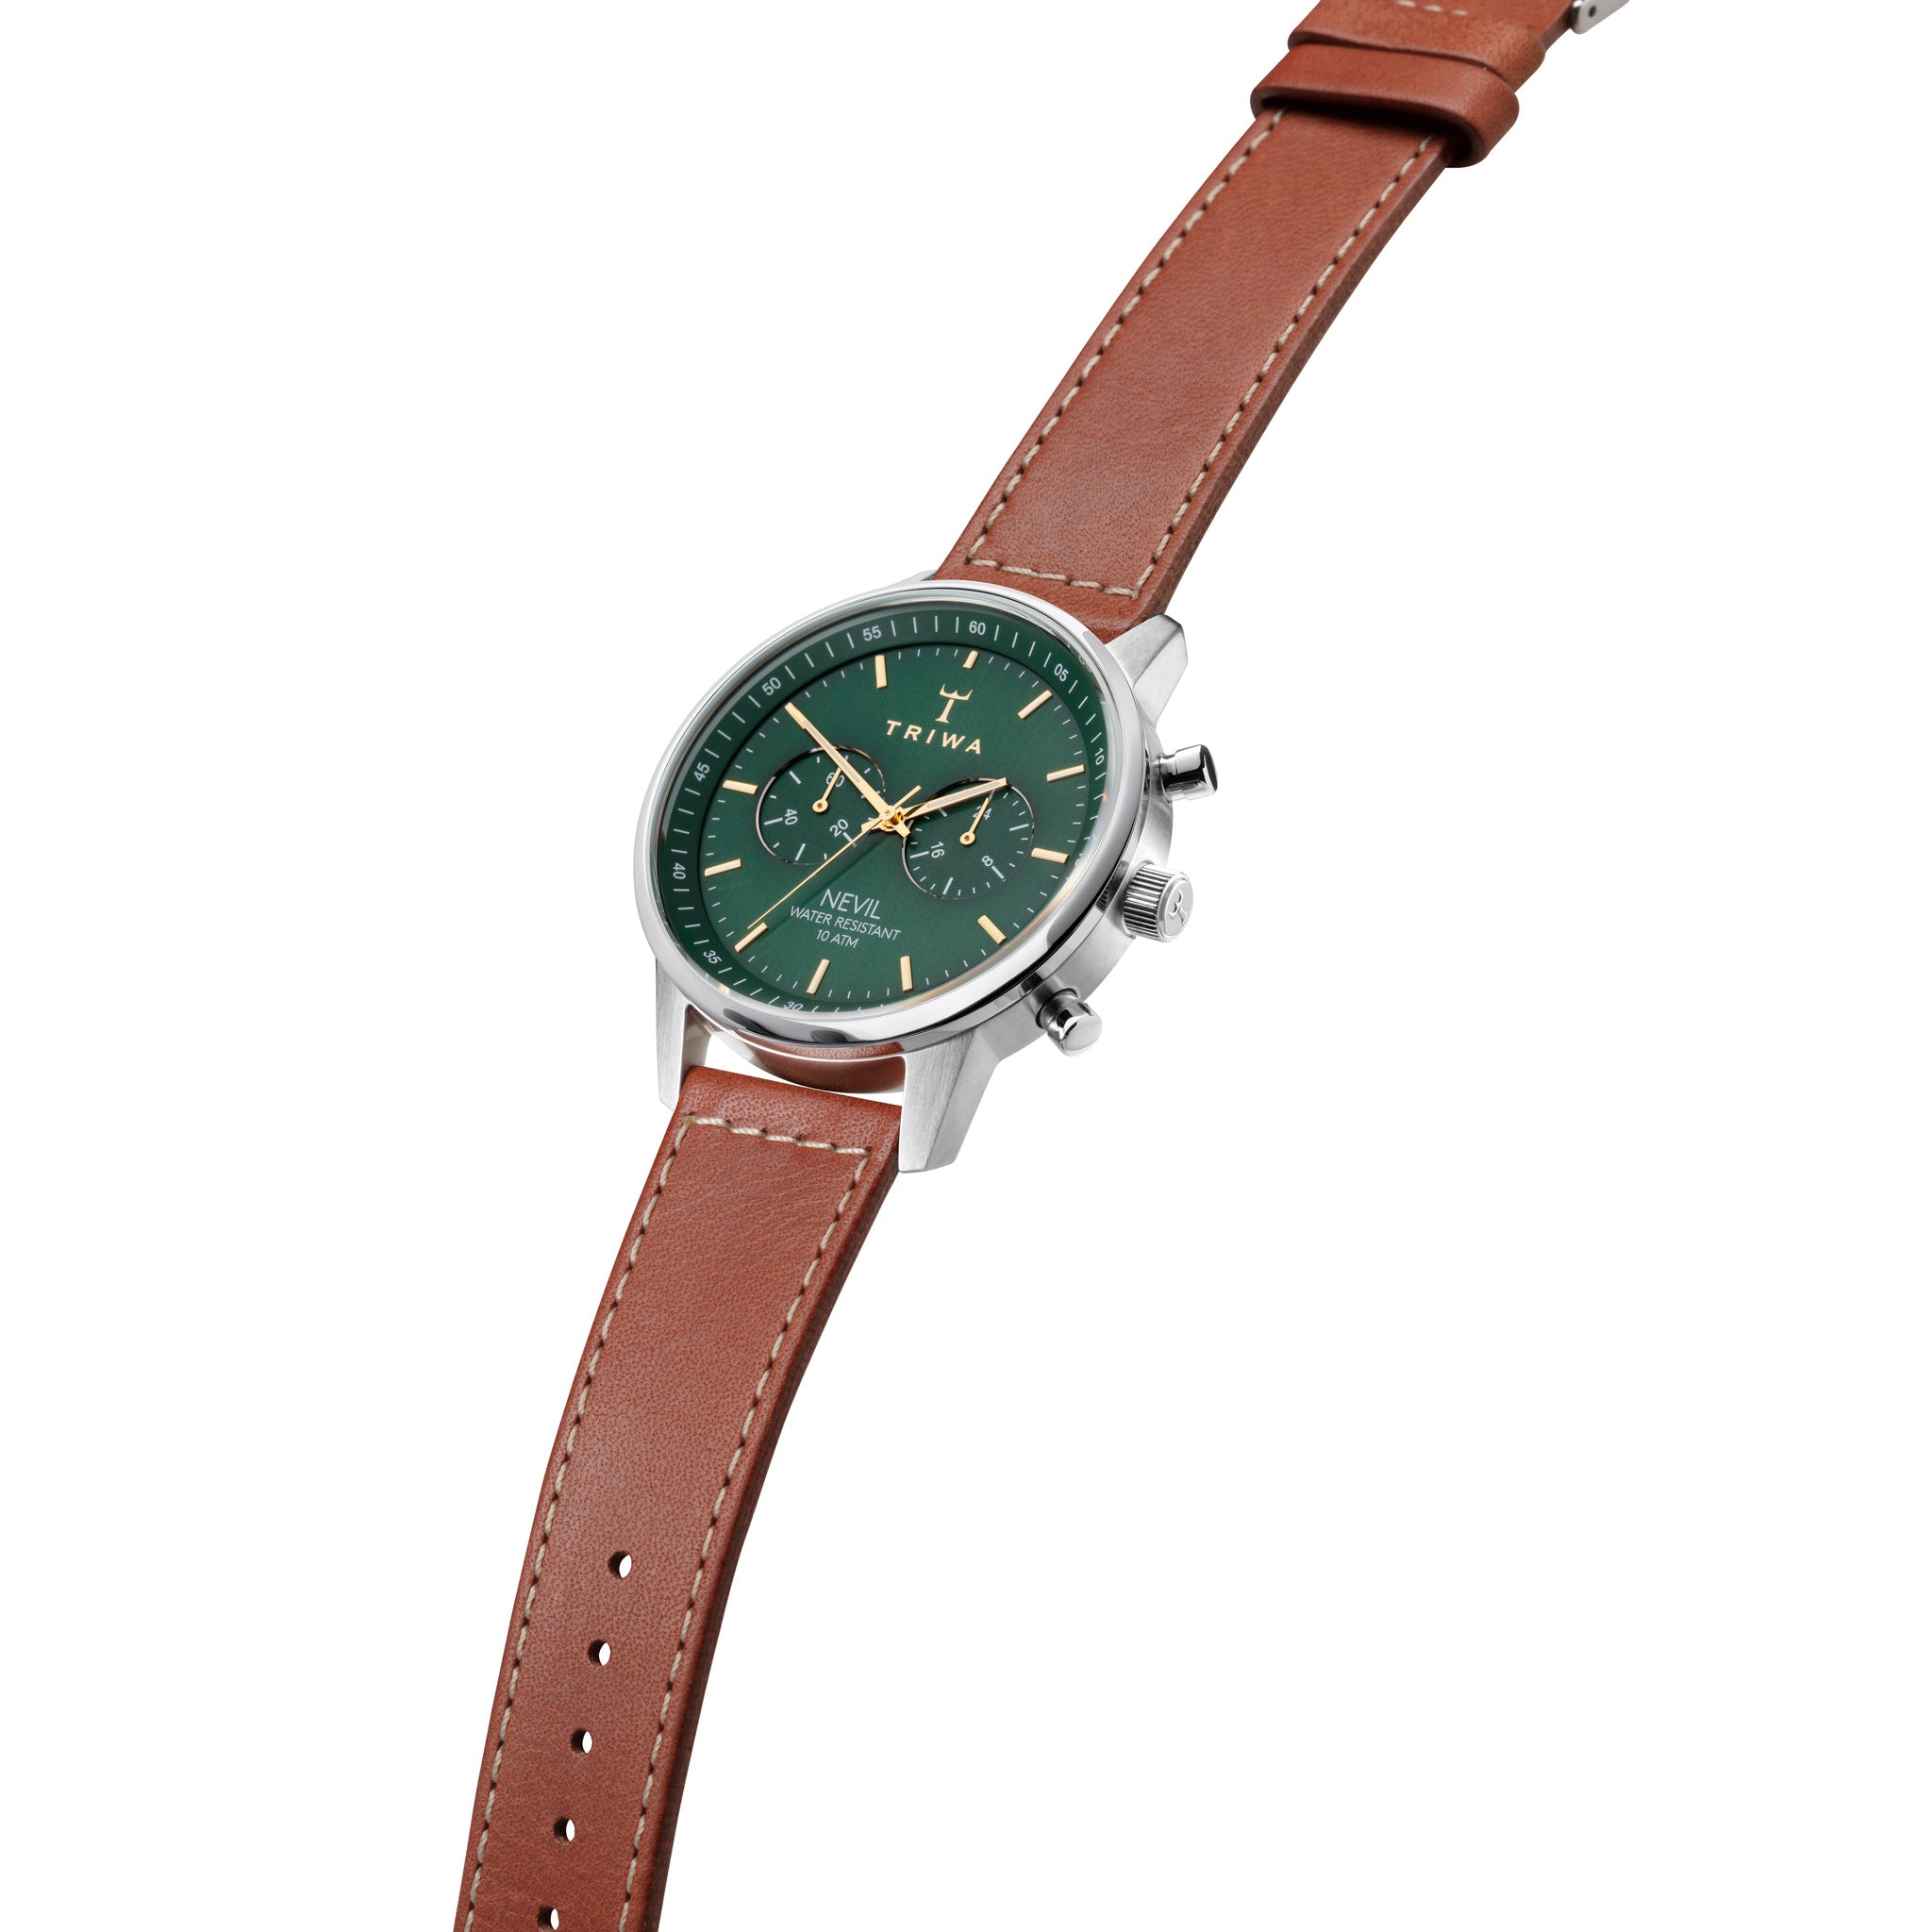 Supreme quality Swedish-made and designed watch in brushed steel with green face and brown leather strap, designed by Stocholkm-based Time Lords Triwa. 